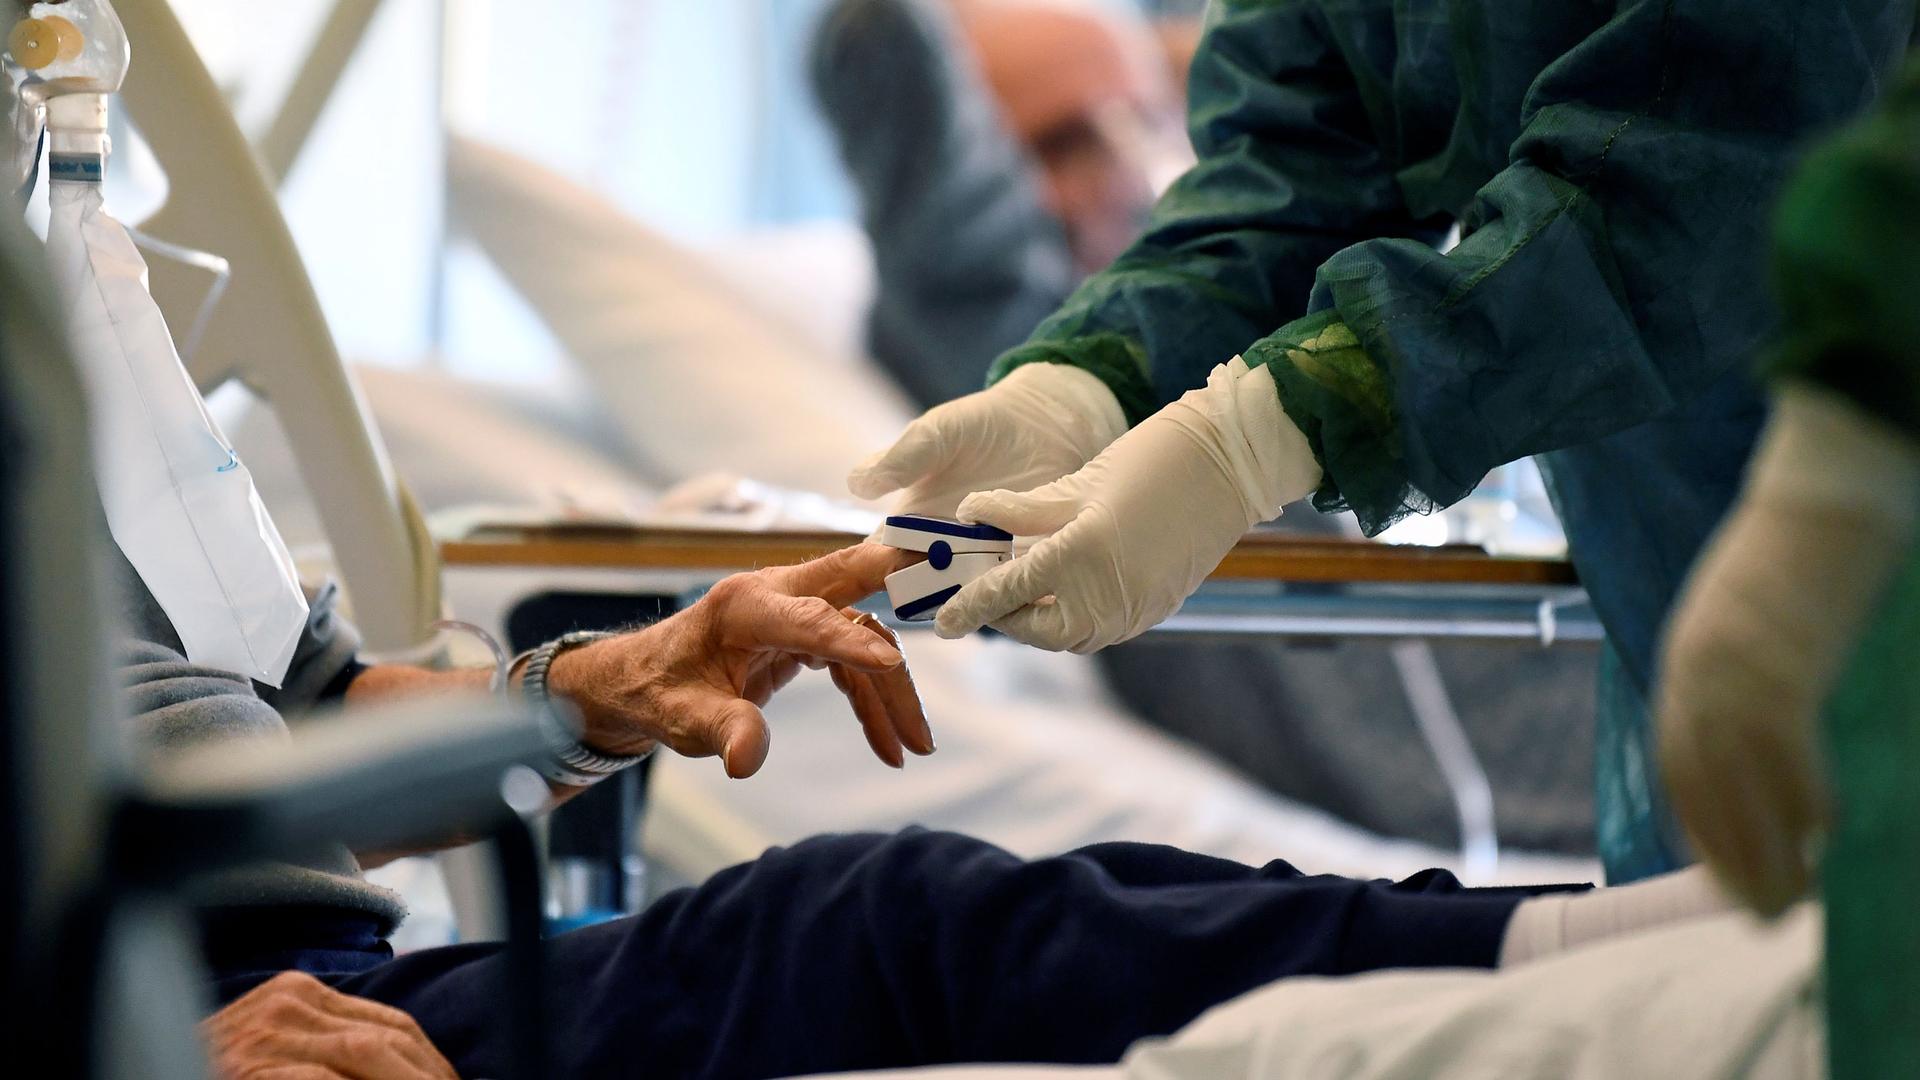 The hands of a medical professional are shown wearing protective gloves and putting a device on a patient's finger.